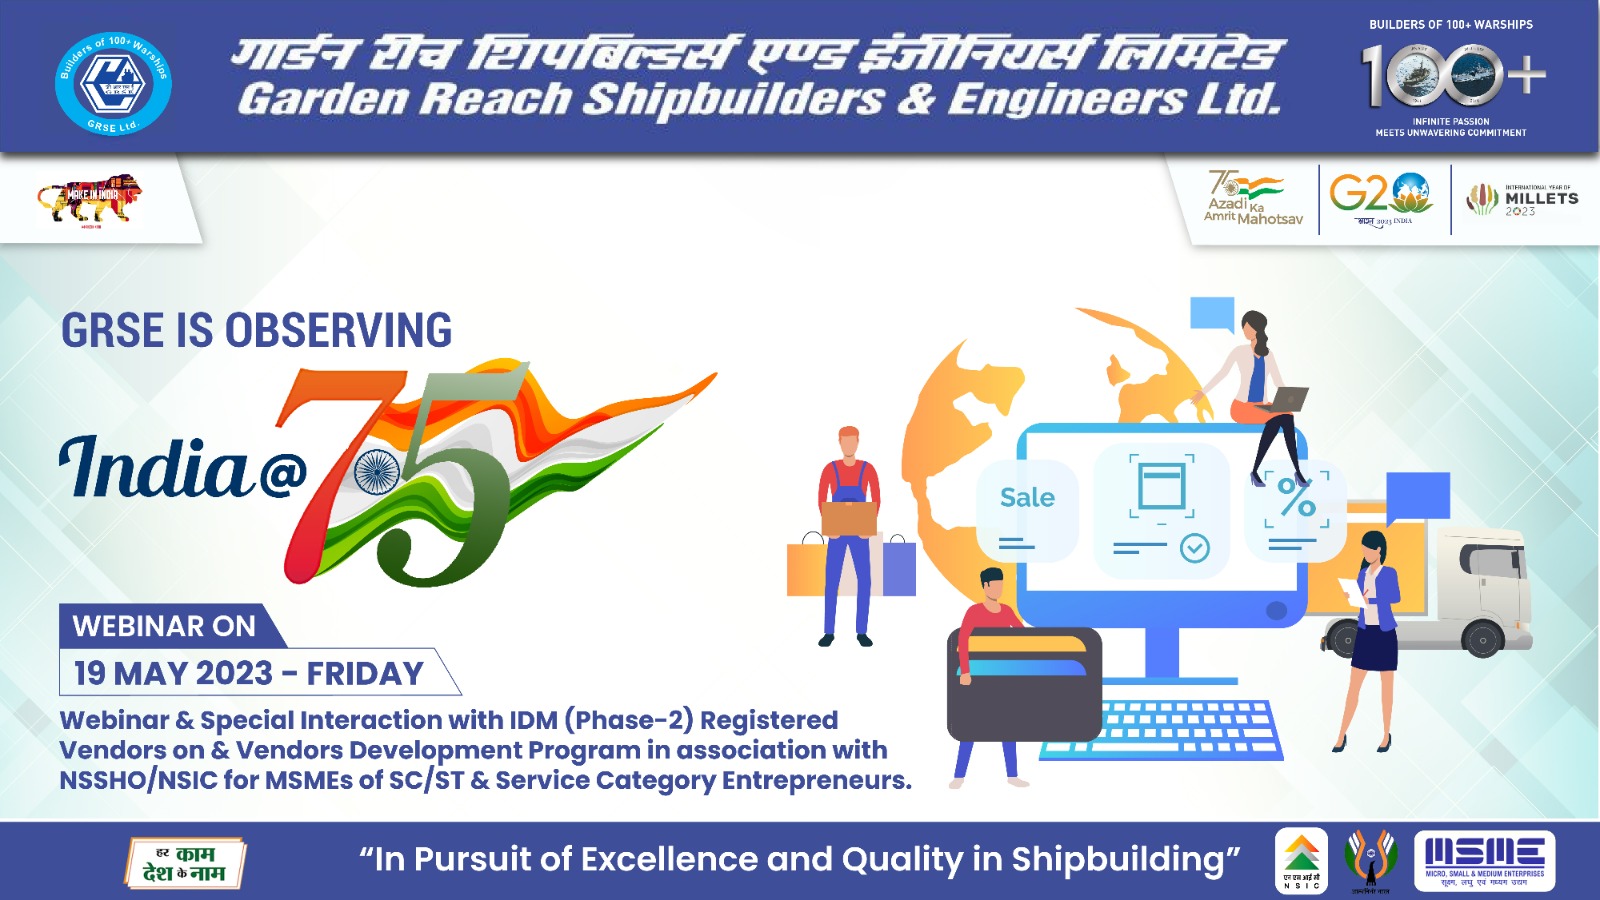 INDIA@75 - Phase X Webinar & Special Interaction with IDM (Phase-2) Registered Vendors & Vendors Development Program in association with NSSHONSIC for MSMES of SCST & Service Caegory Entrepreneurs on 19 May 23